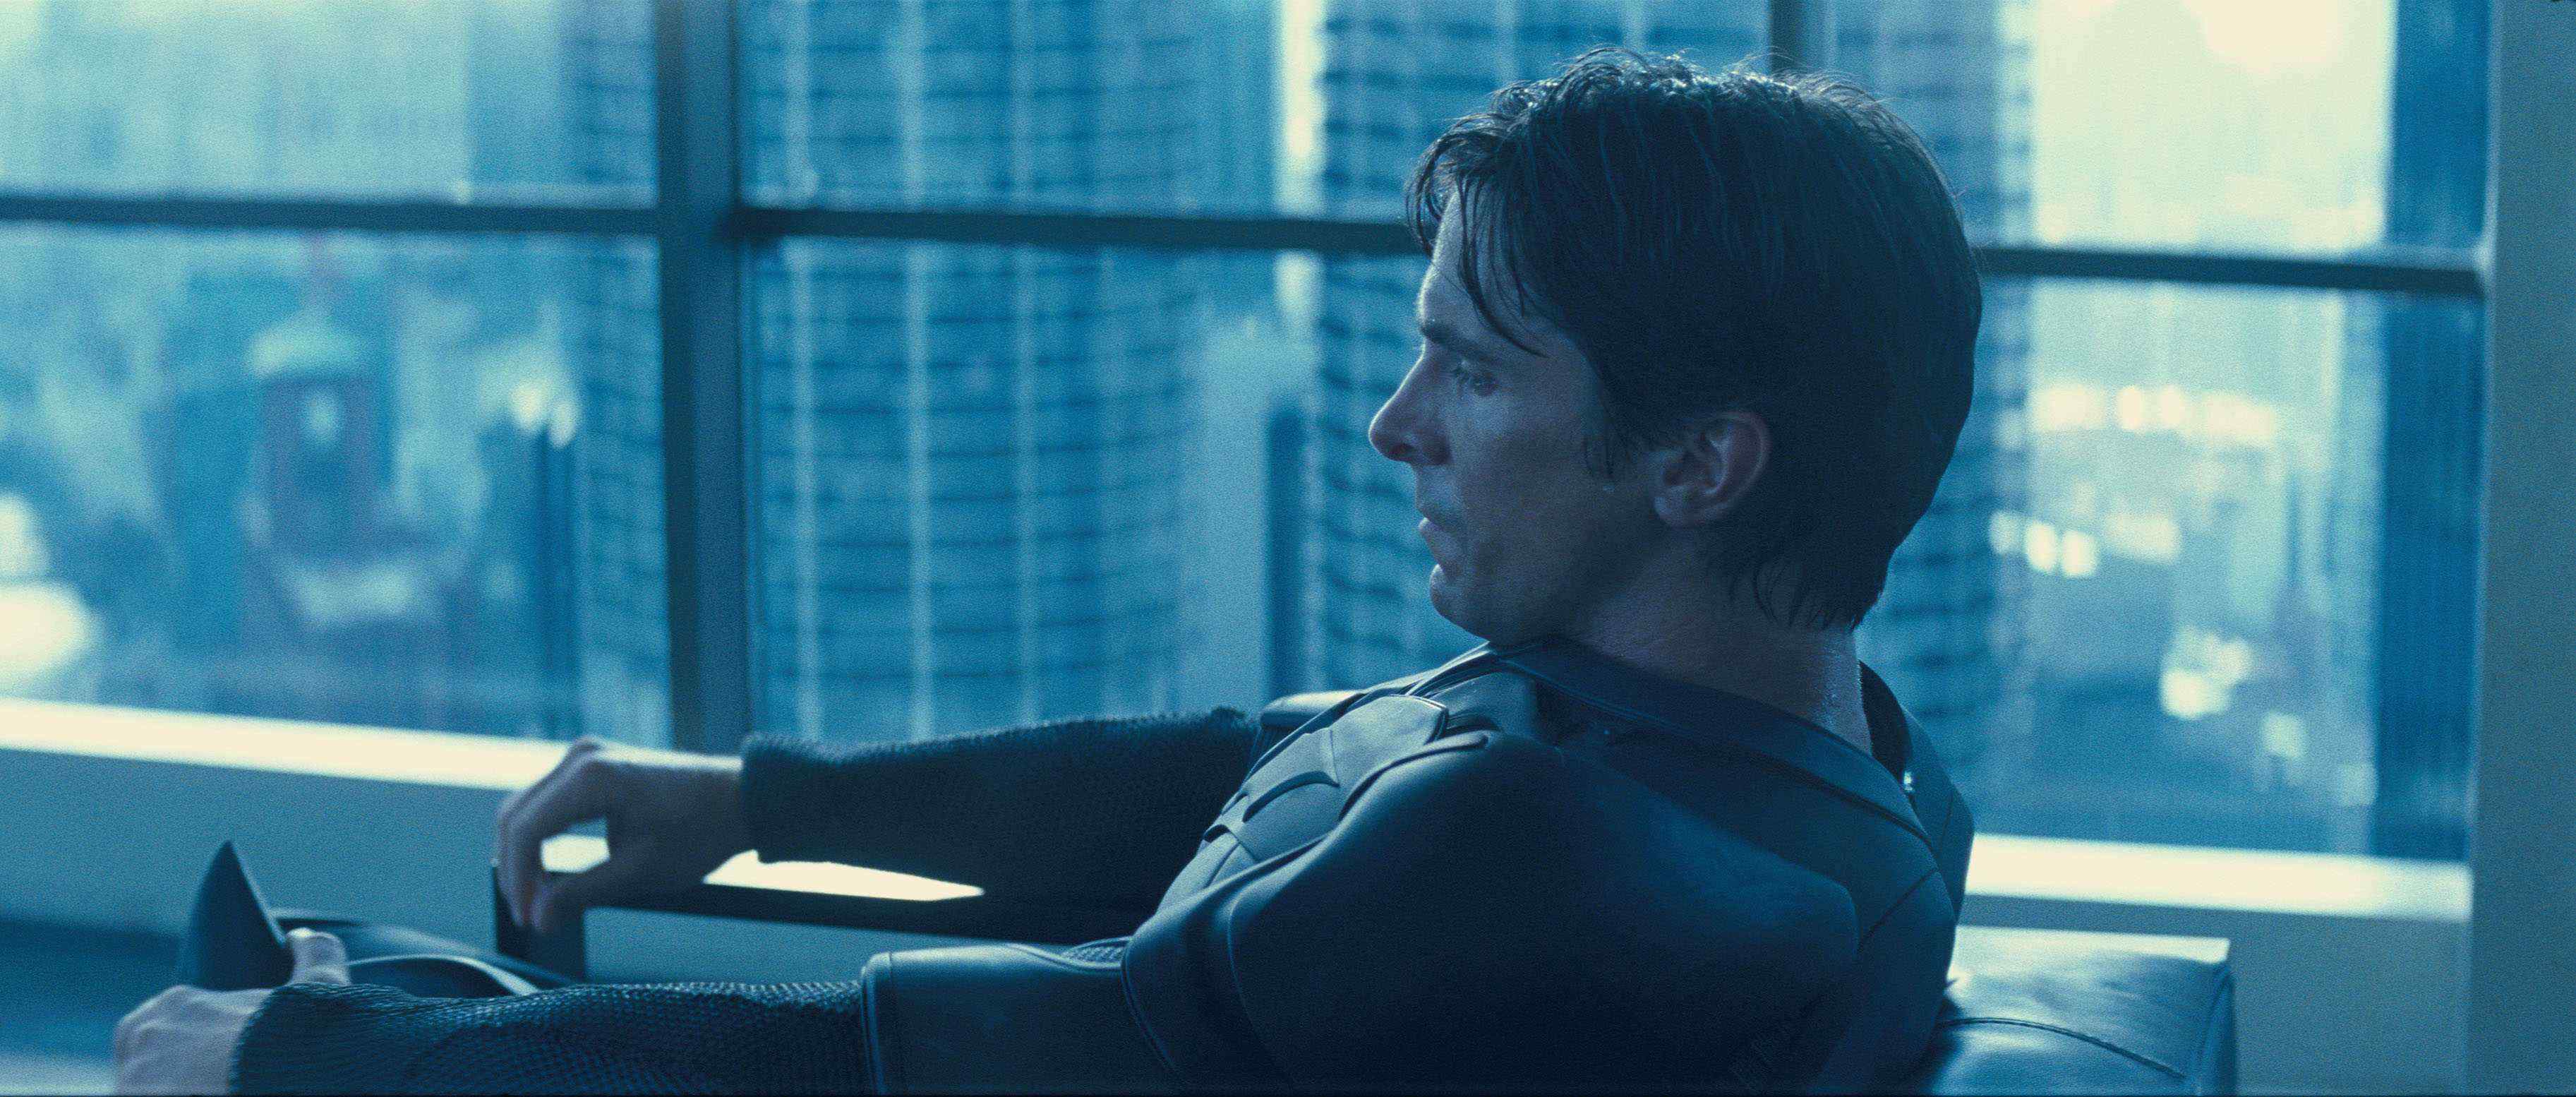 CHRISTIAN BALE stars as Bruce Wayne in Warner Bros. Pictures' and Legendary Pictures' action drama 